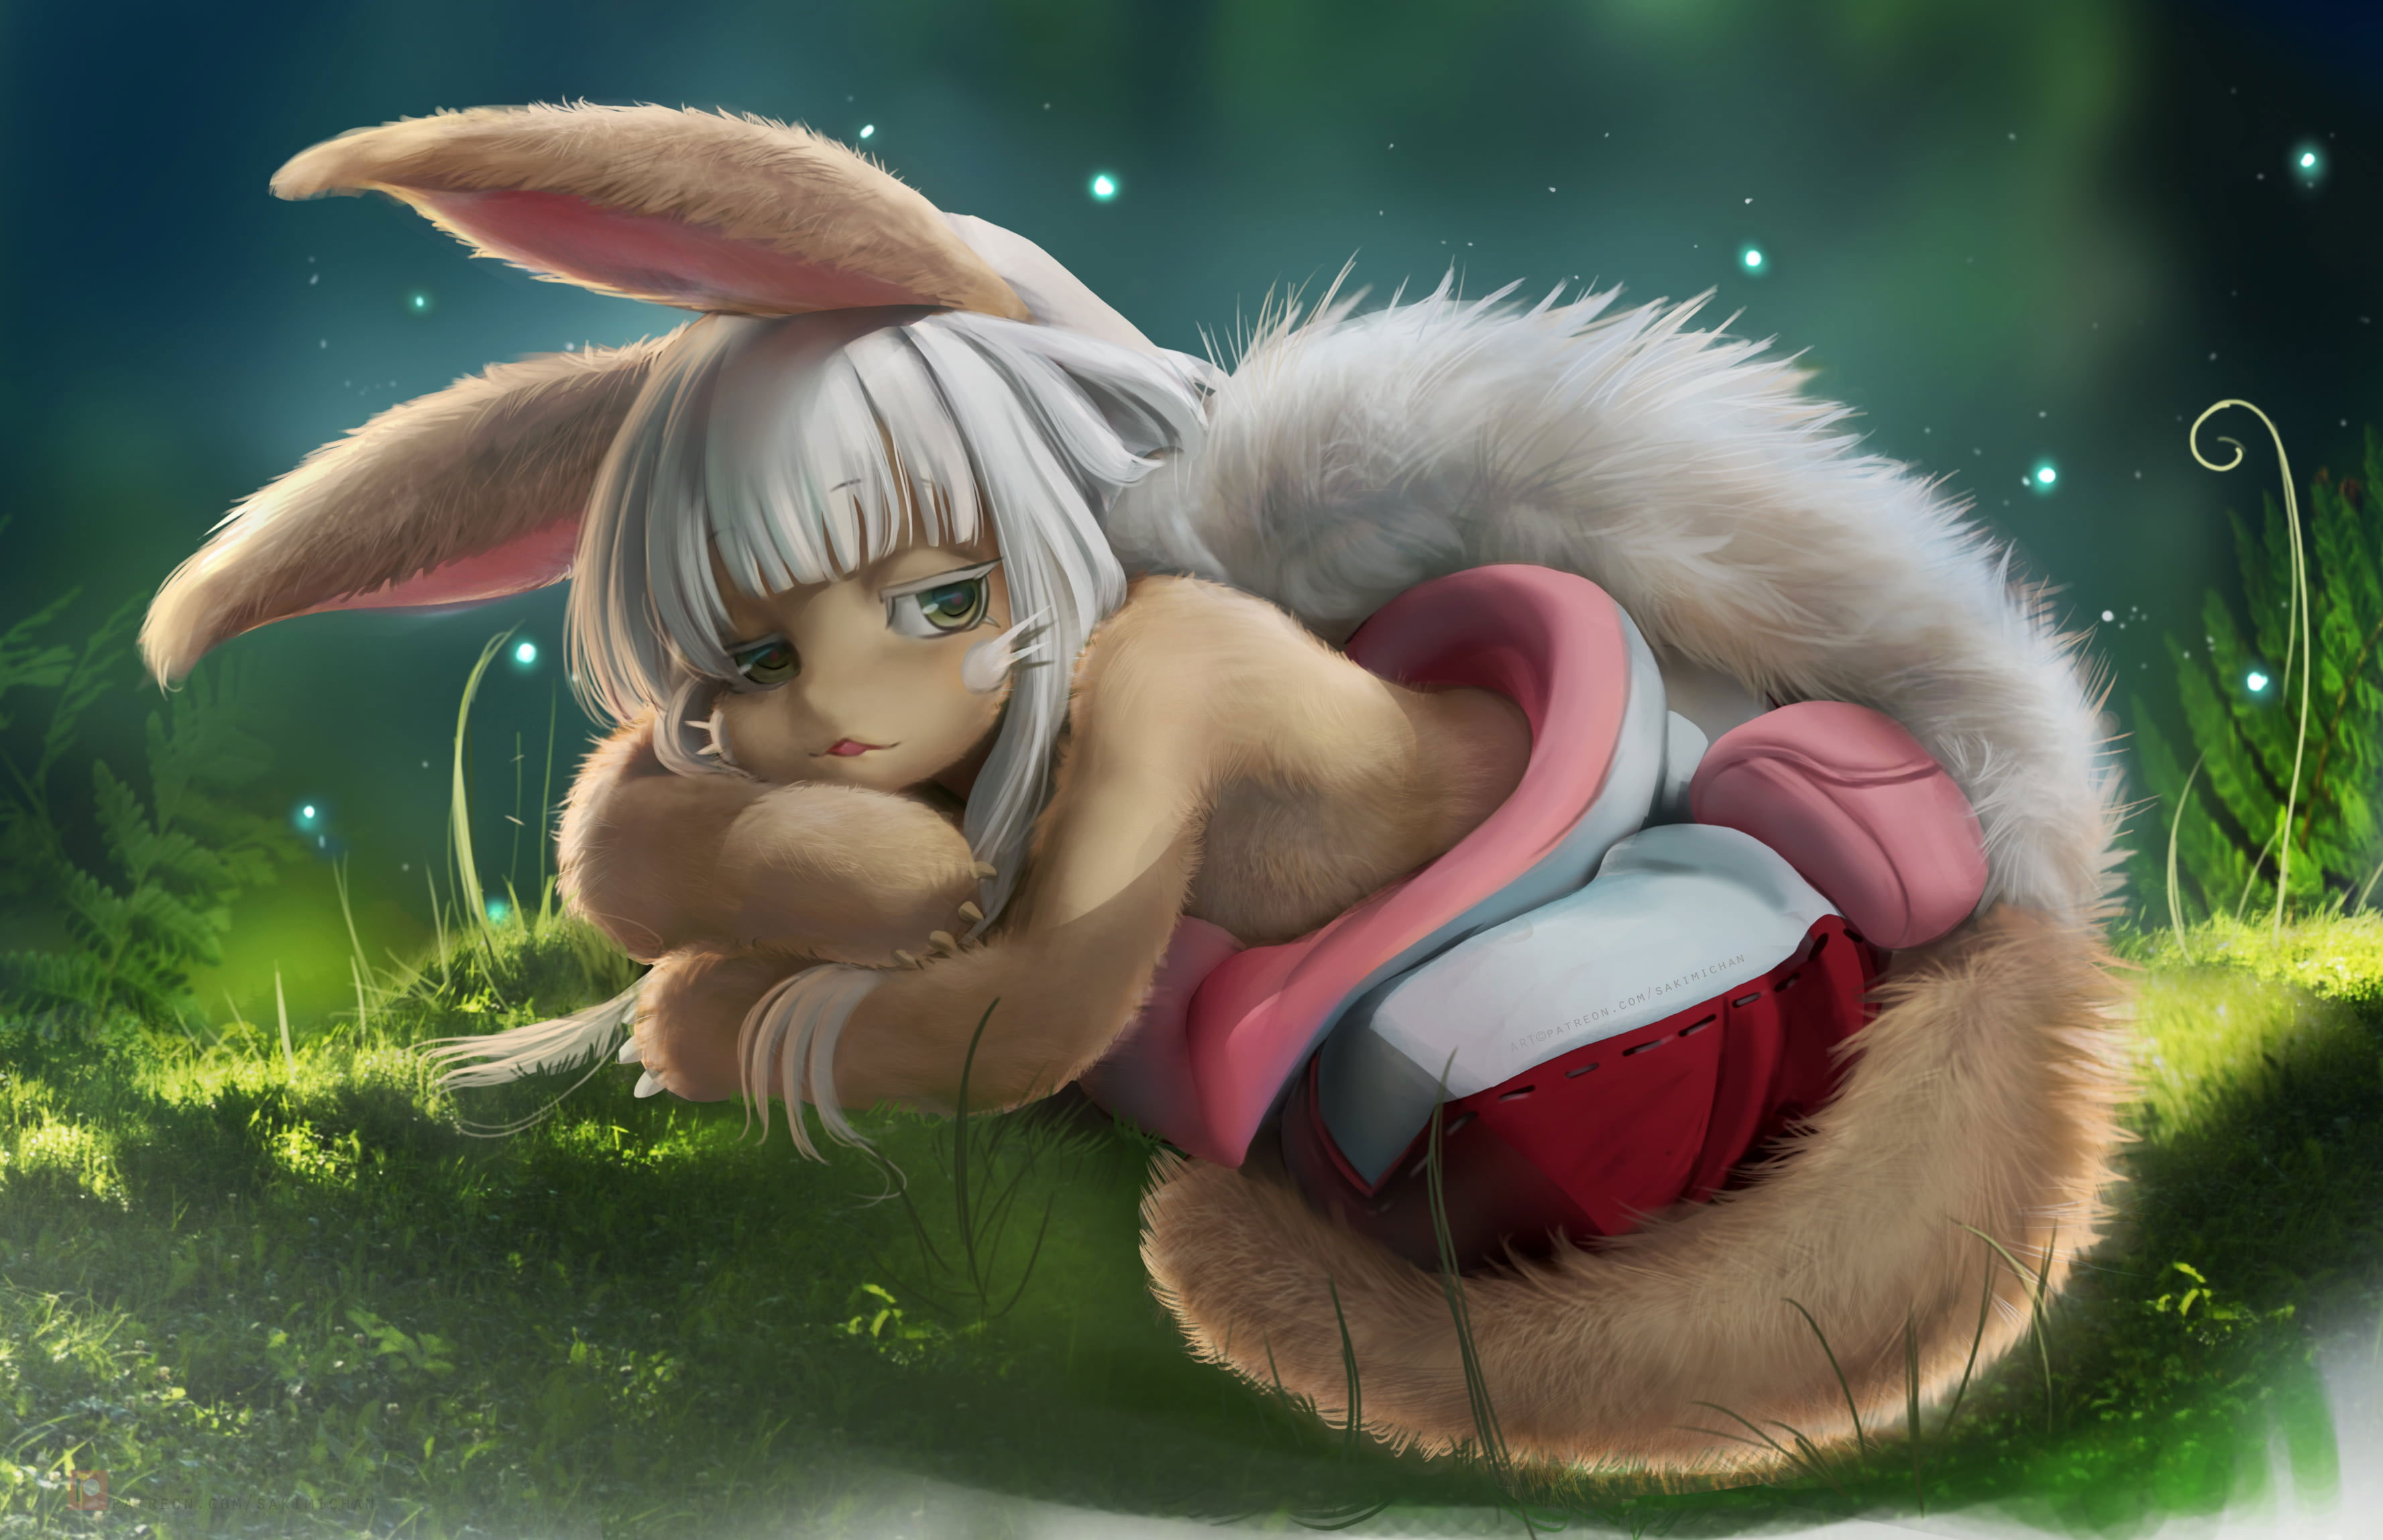 Wallpaper Nanachi Made In Abyss, Anime, Anime Girls, Made in Abyss, Anime